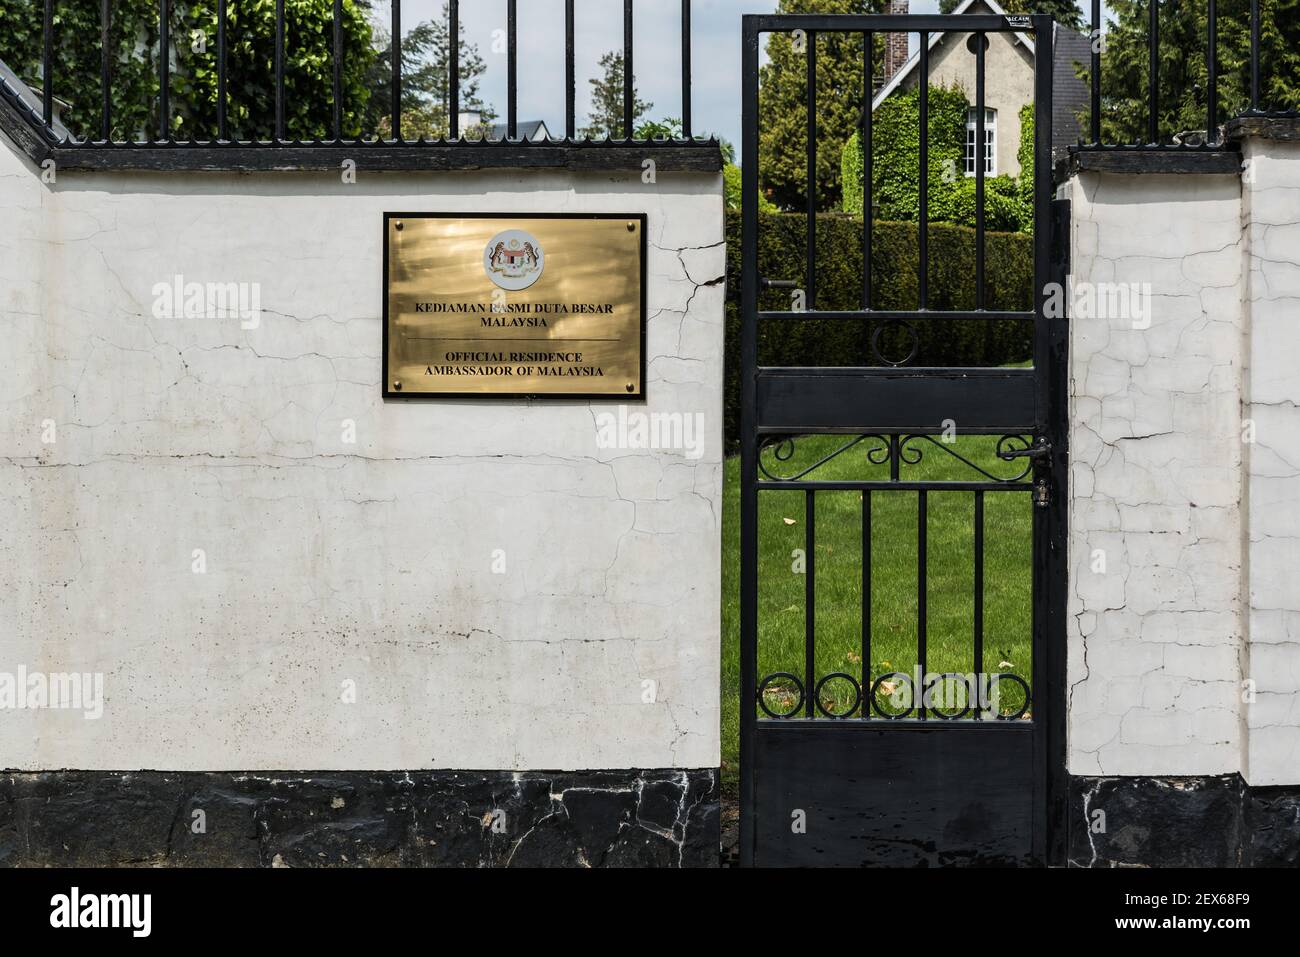 The official residence of Malaysia in Brussels, Belgium Stock Photo